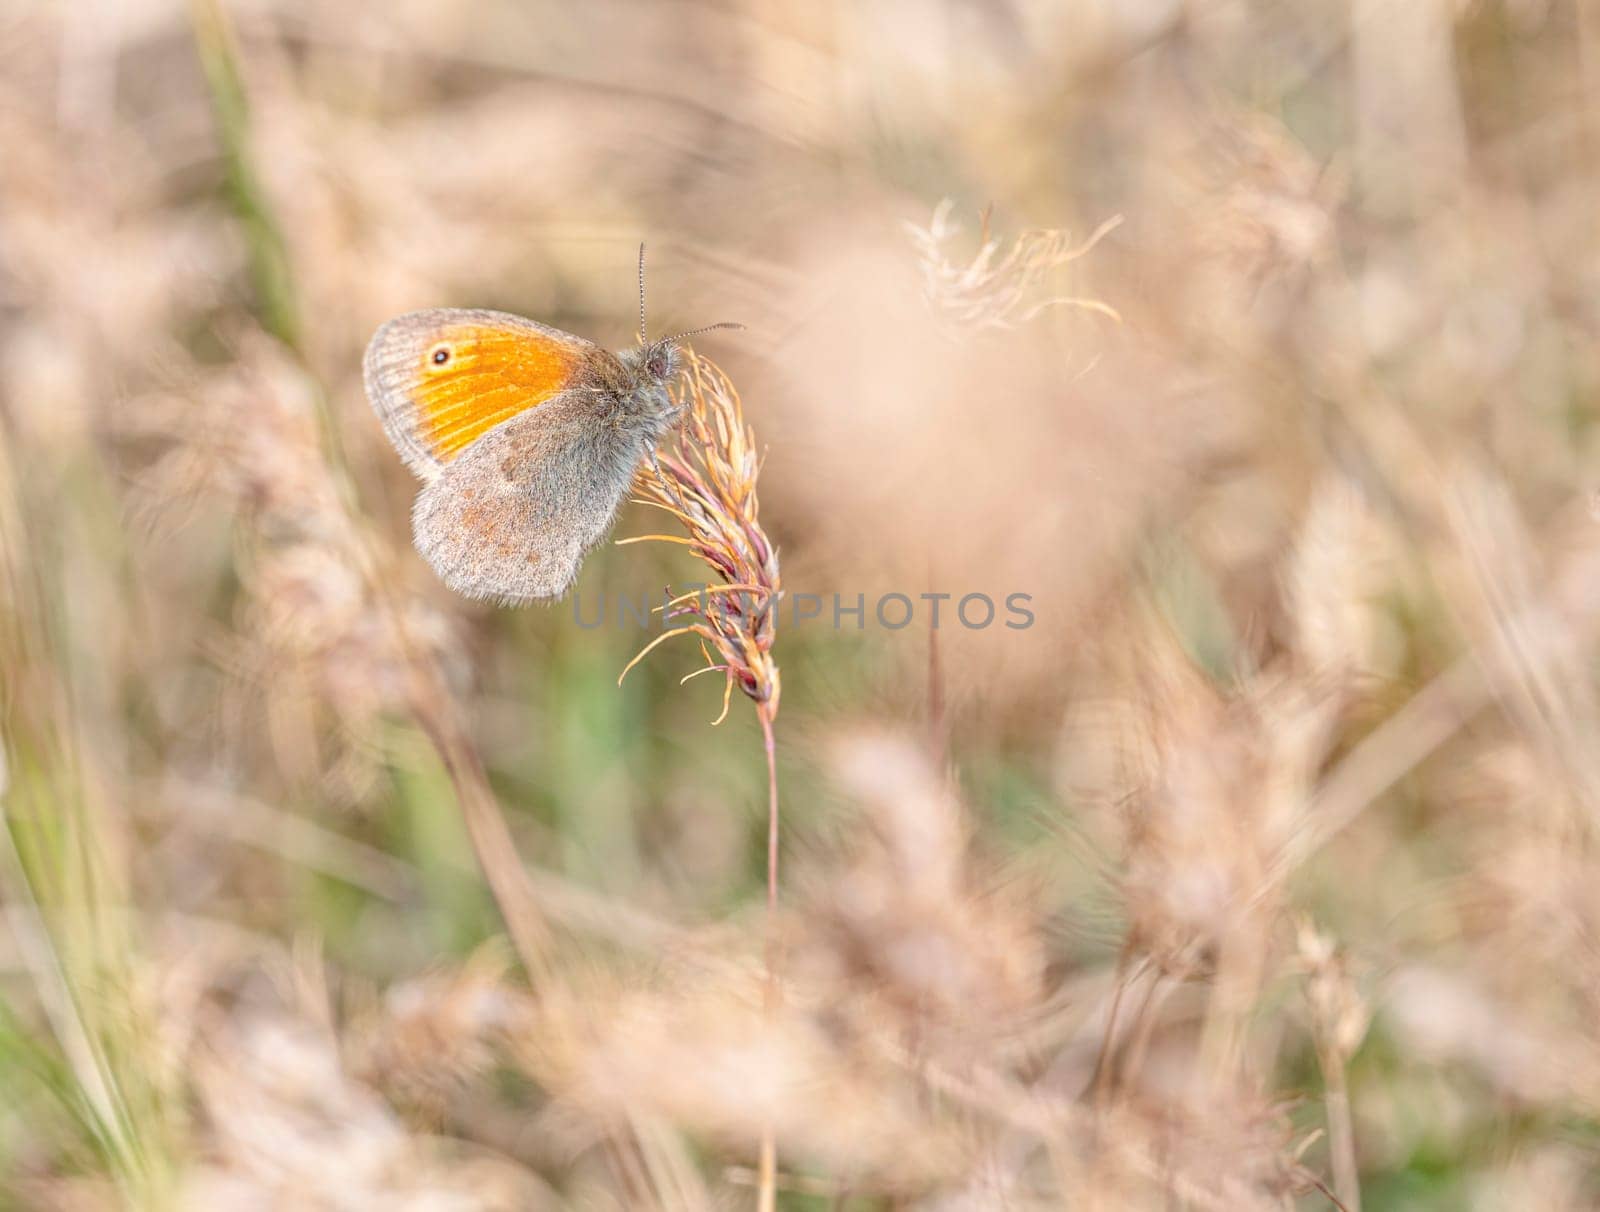 Small heath butterfly, coenonympha pamphilus, in a field